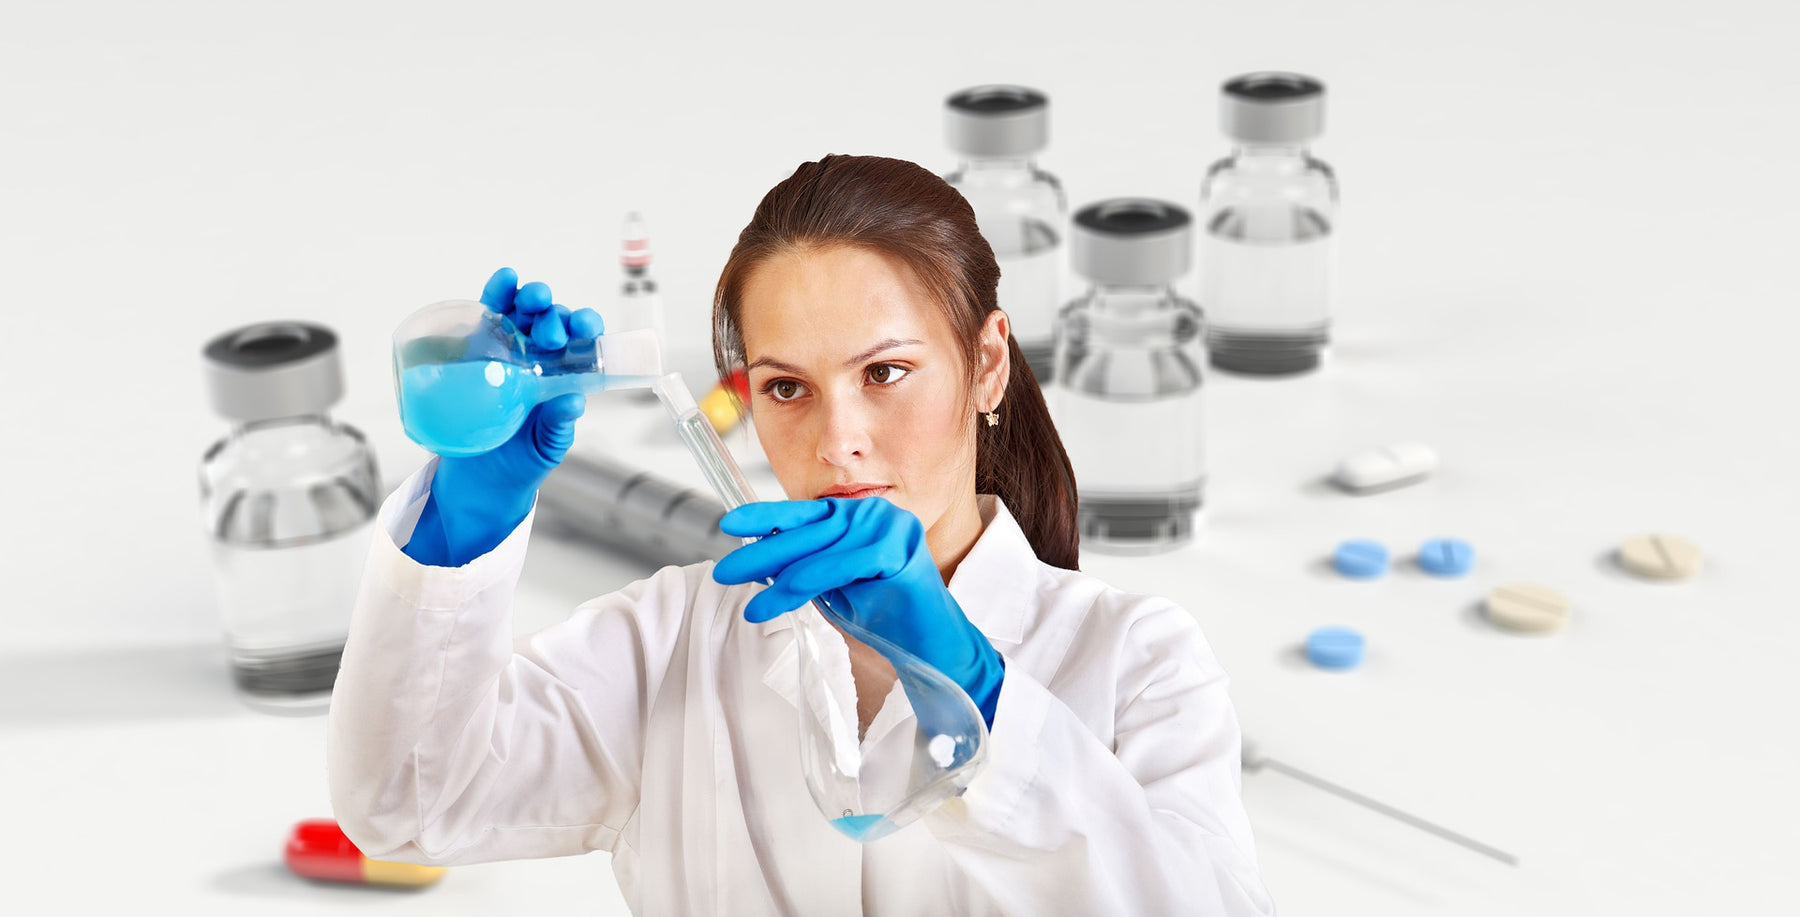 Laboratory woman with blue gloves pouring liquid